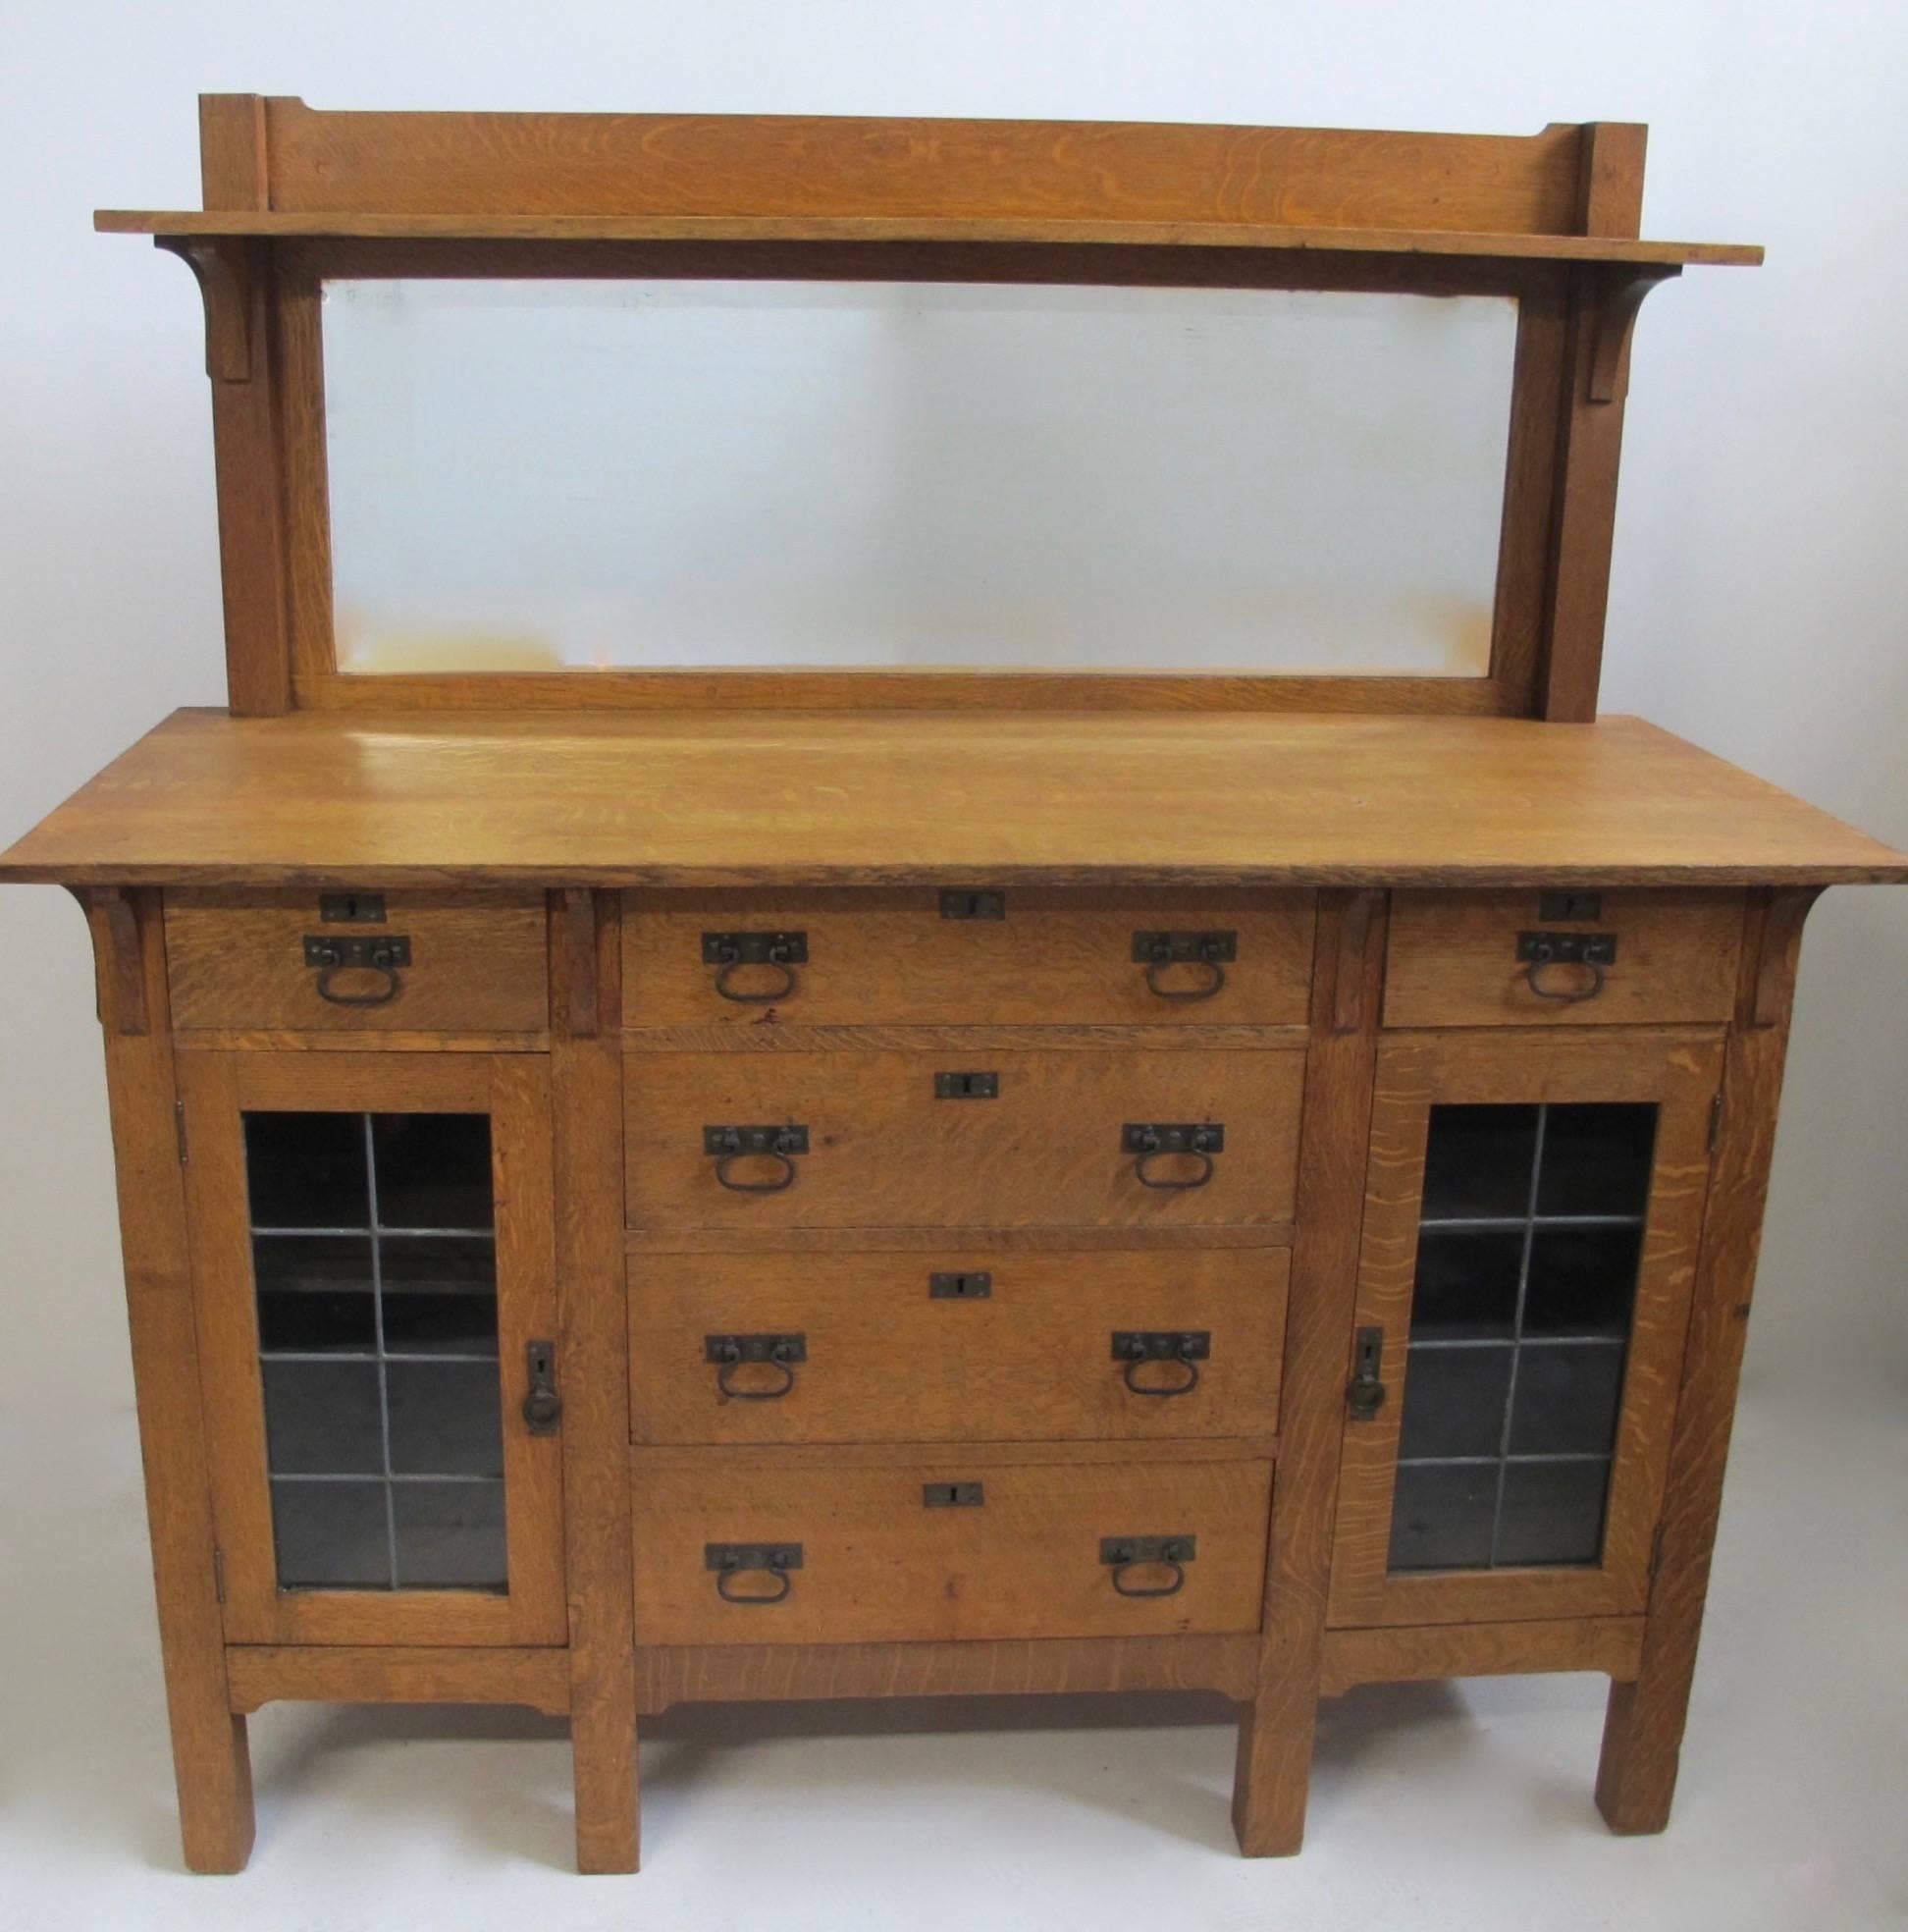 Mission oak sideboard in the Arts and Crafts period design. Having a pair of glass cabinet doors, each having a single adjustable shelf inside, all original hand-wrought iron hardware and beveled mirror back. American, circa 1900.